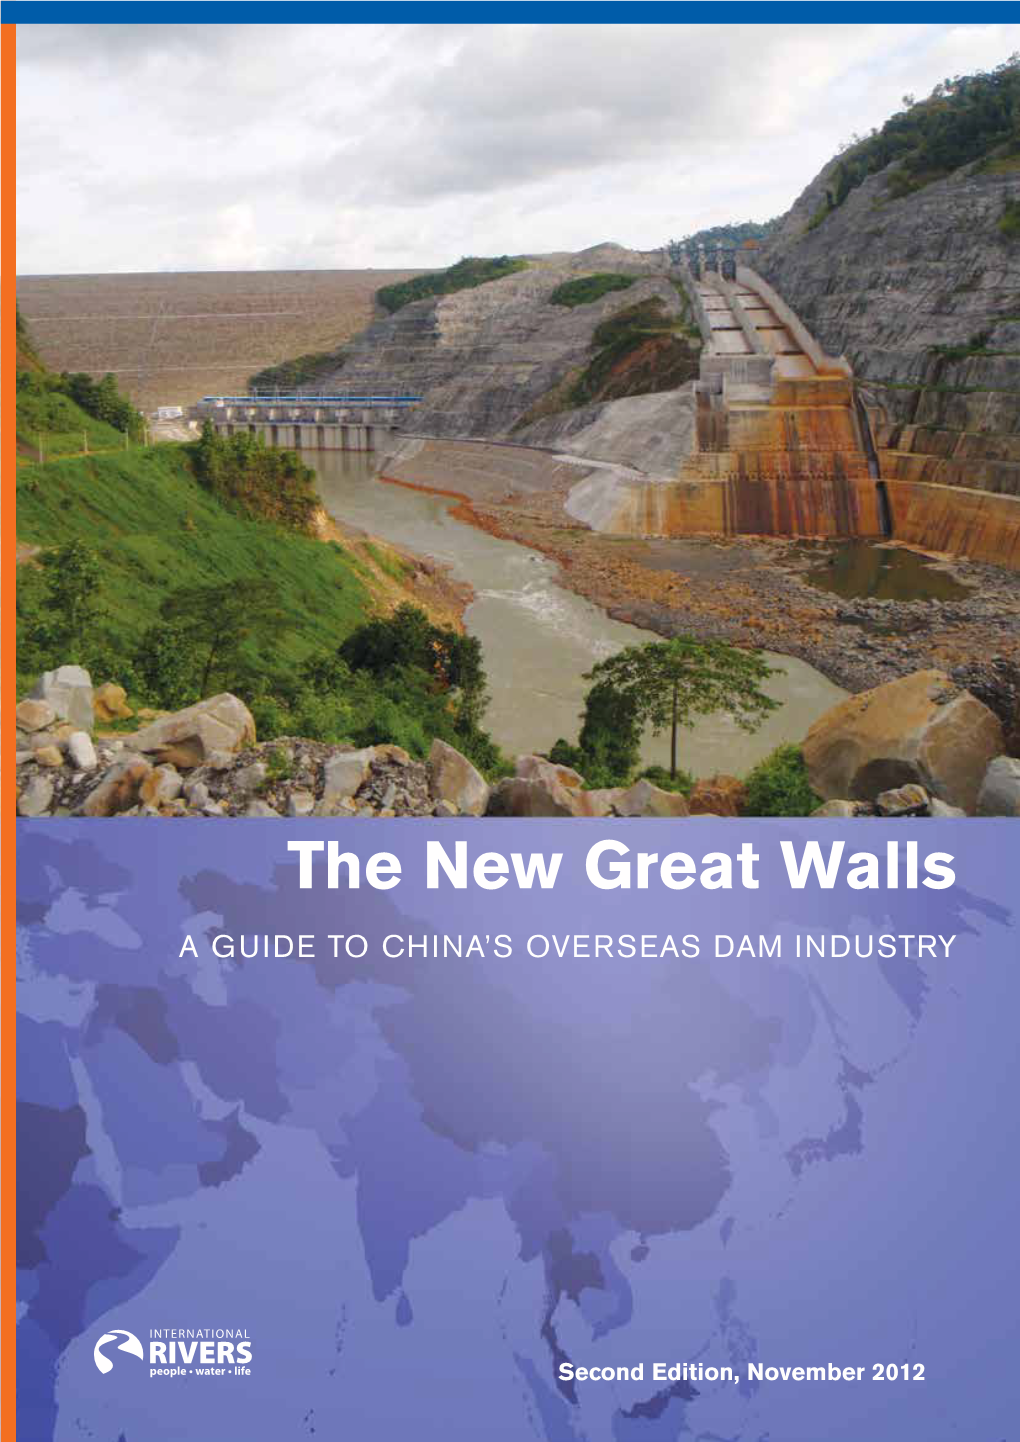 The New Great Walls: a Guide to China's Overseas Dam Industry